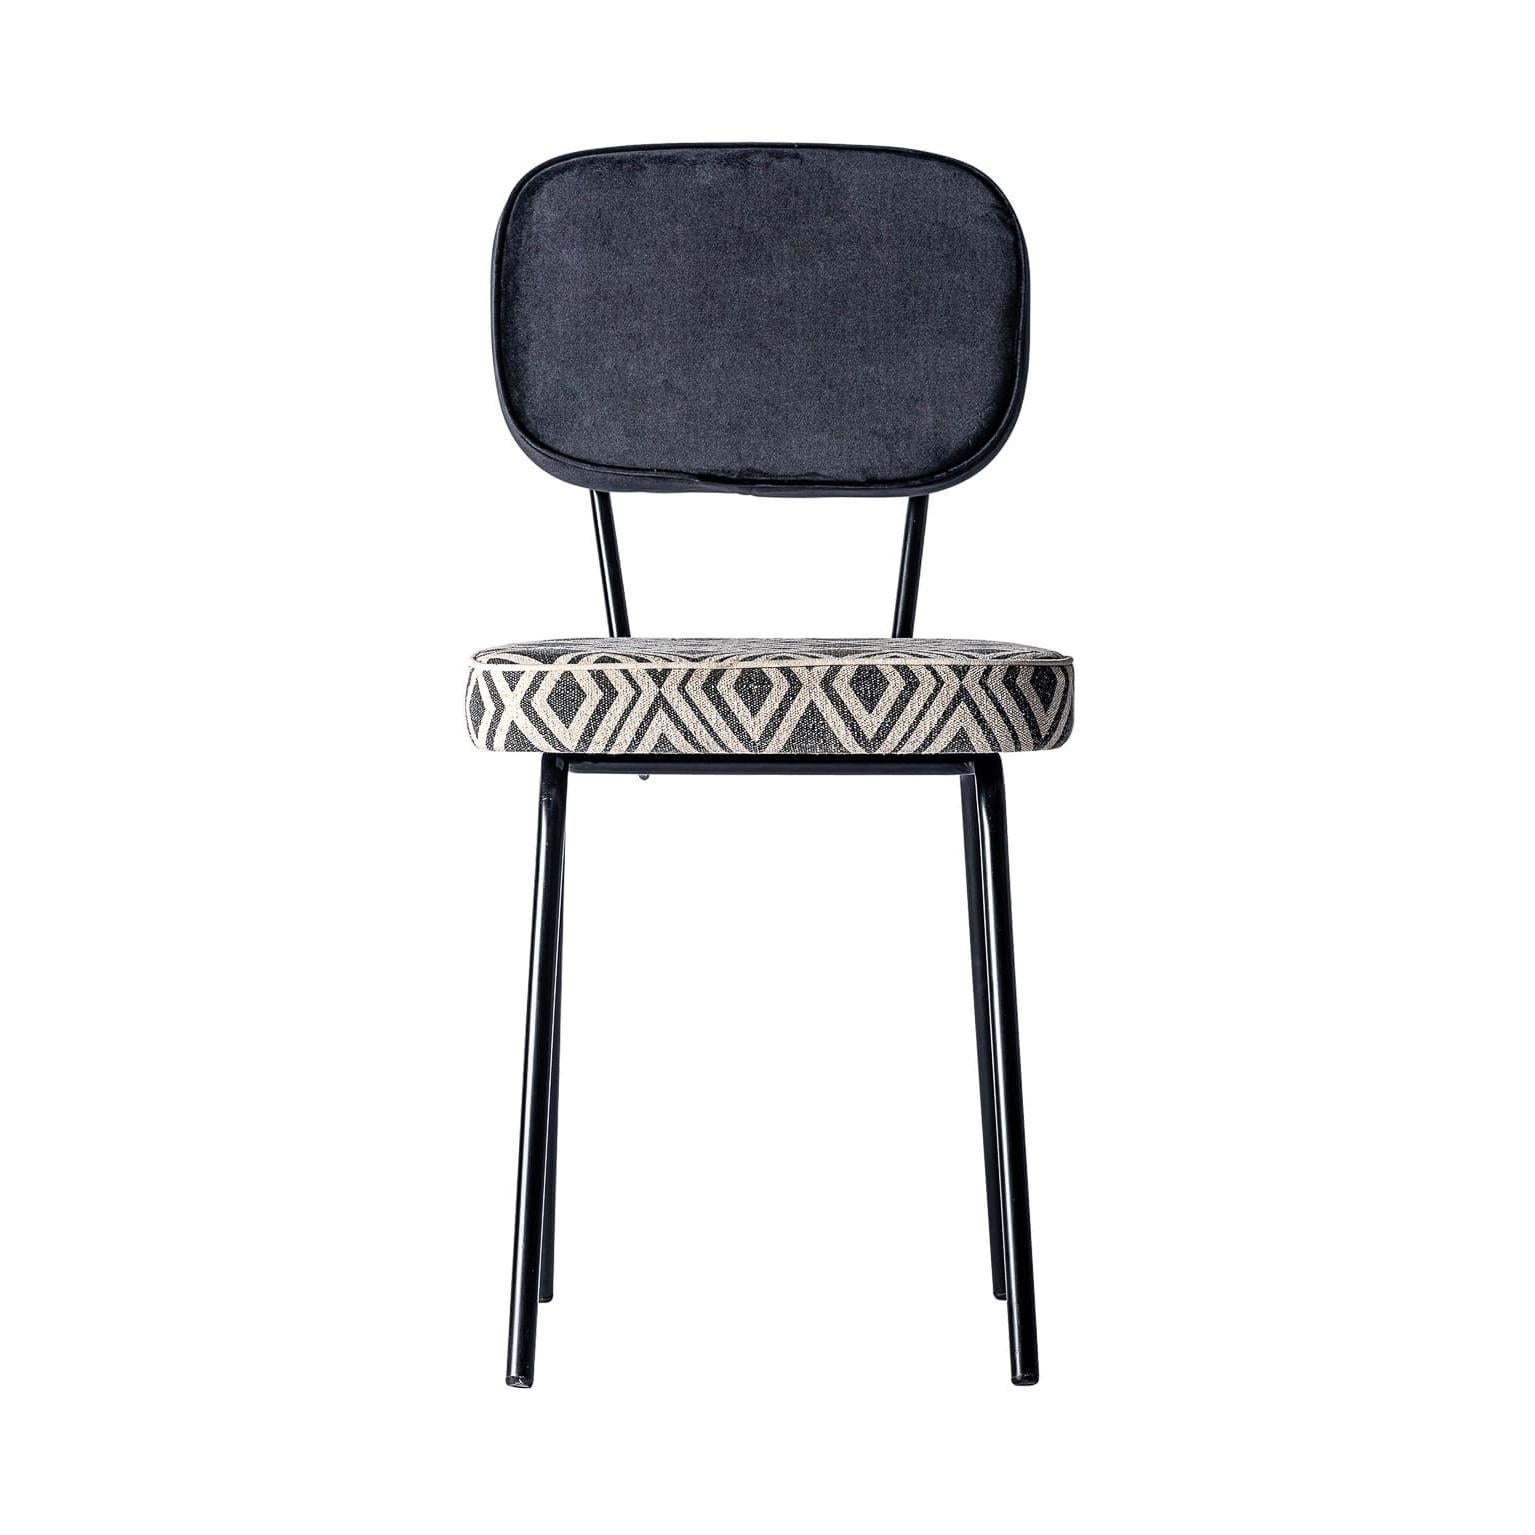 Mid-Century Modern Vintage Design and MCM Style Black and White Fabric Chair